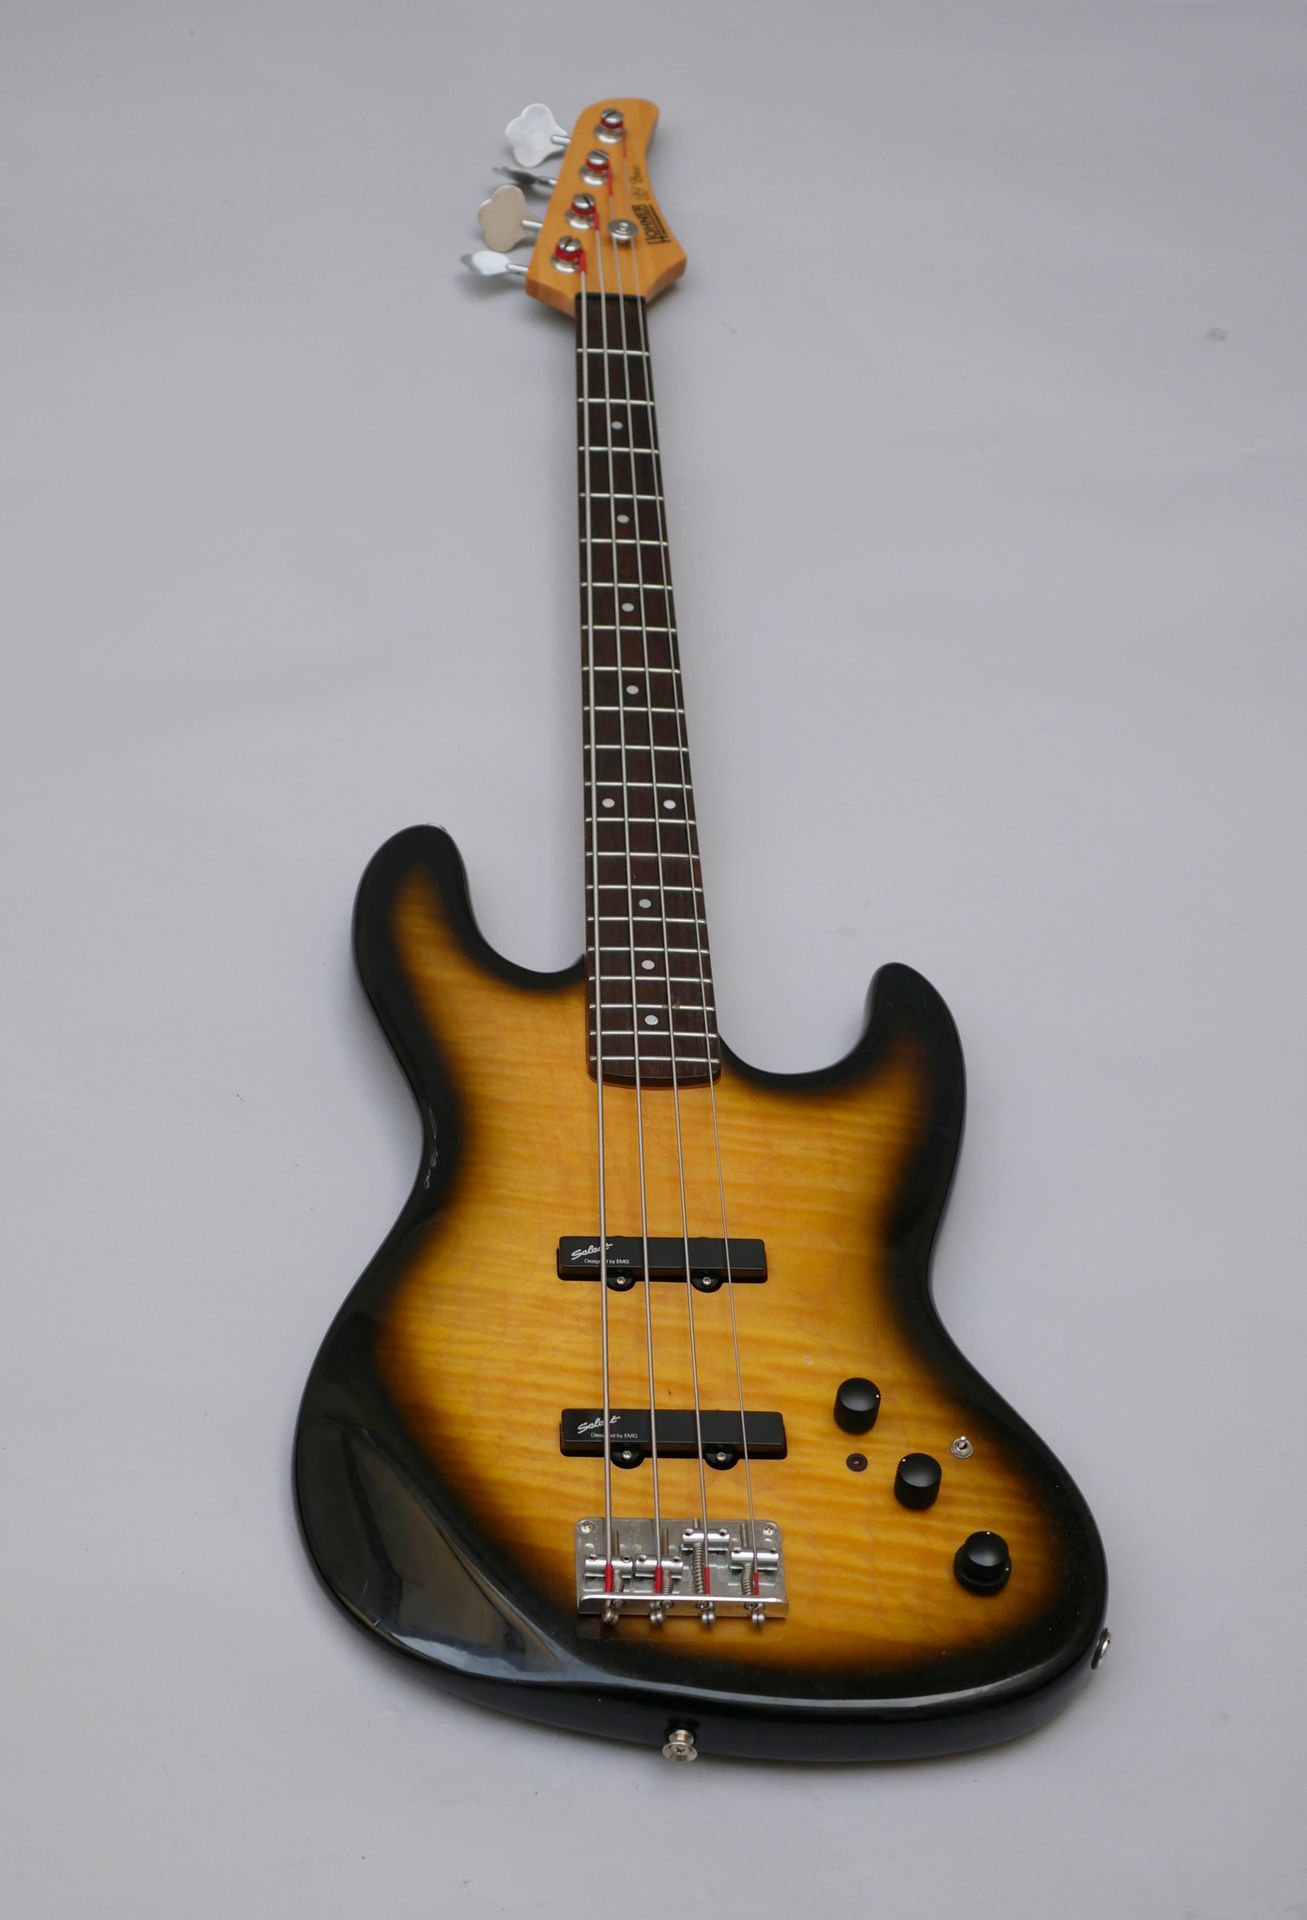 Null Solidbody Hohner Professional electric bass guitar.

Marks of use, case.

(&hellip;